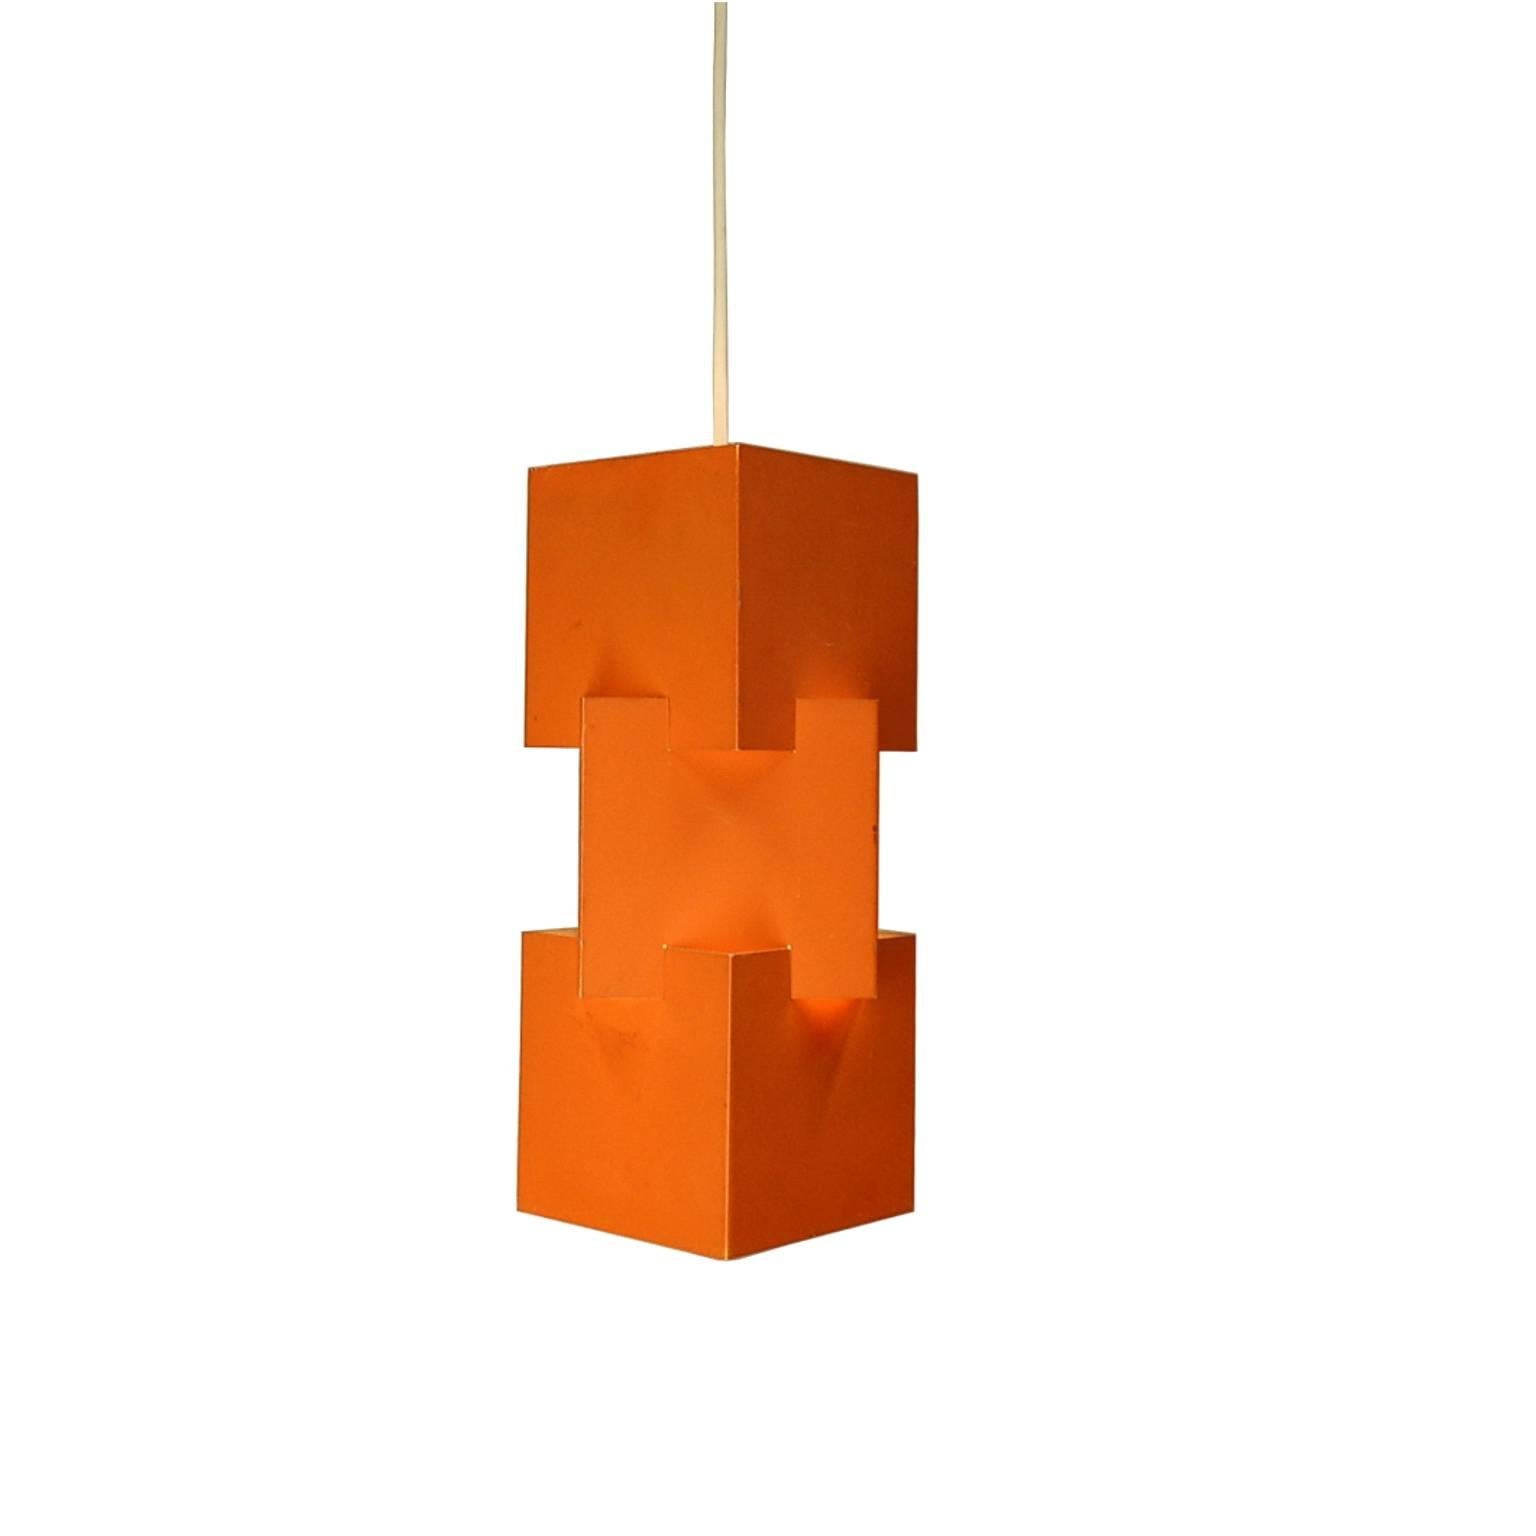 This lamp was one of the first designs by Jo Hammerborg for Fog and Mørup. It dates back to the early 1960s and is relatively rare. It was available in blue, white and orange.